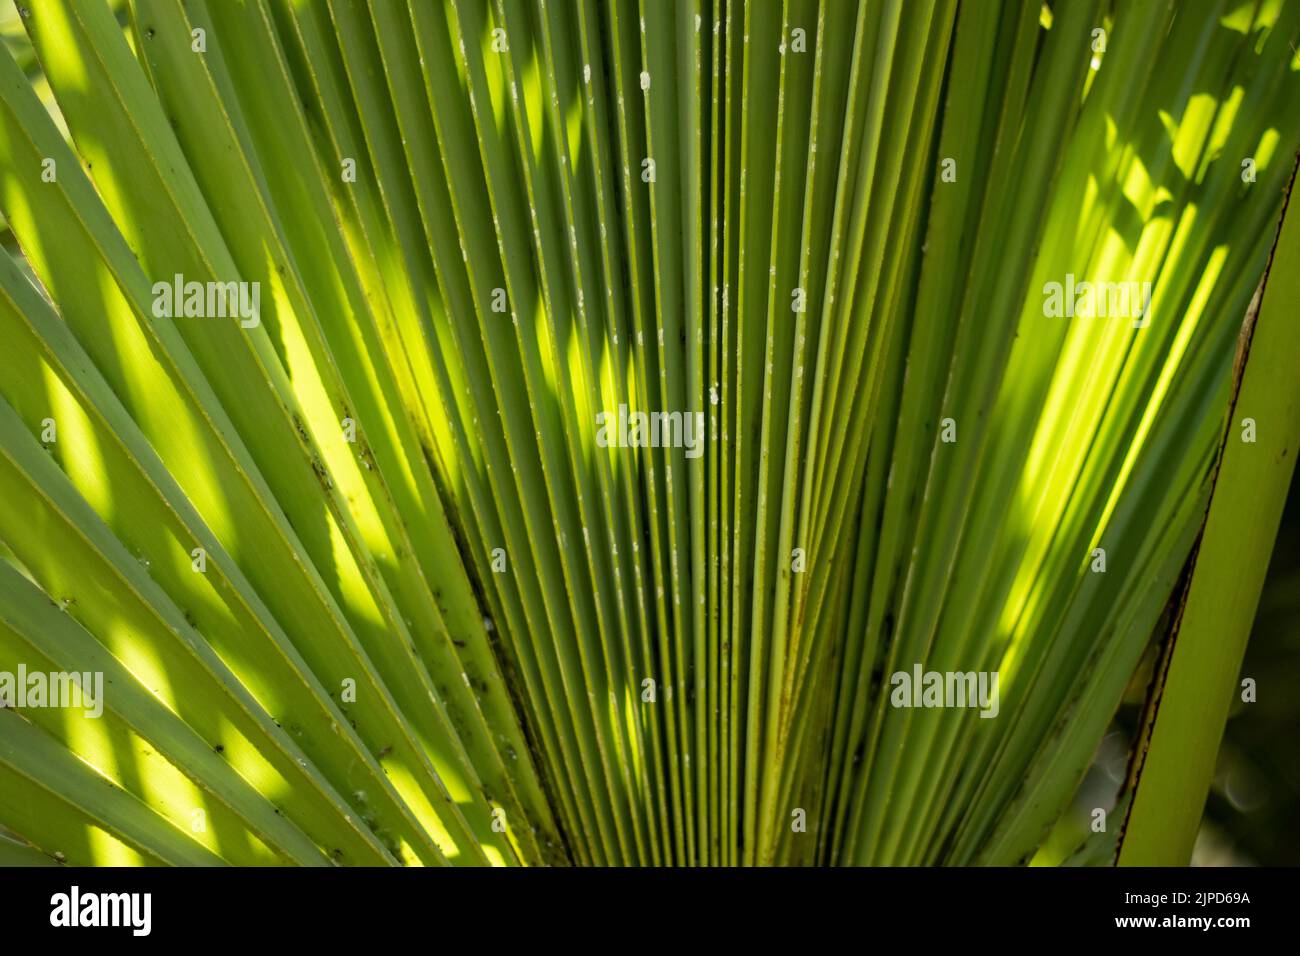 Commonly known as doub palm, palmyra palm, tala palm, toddy palm, or wine palm. Its scientific name is Borassus flabellifer. It belongs to Arecaceae f Stock Photo